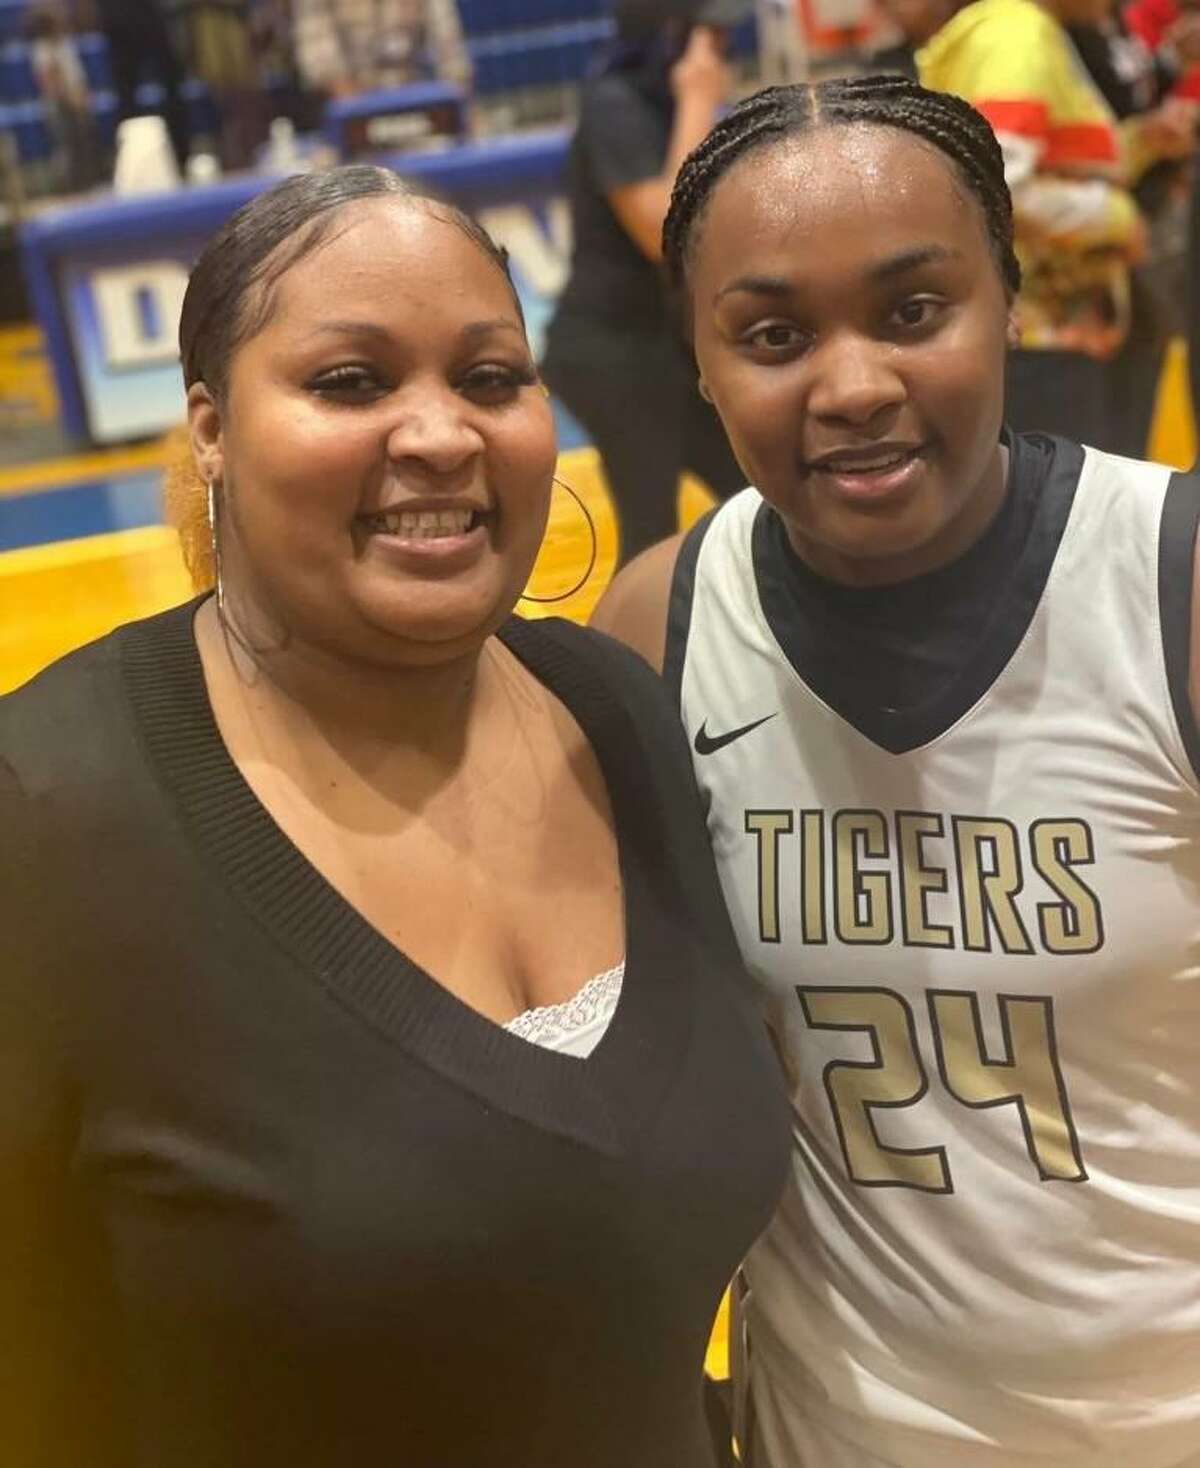 Conroe assistant coach Chanistie Wiley, left, is shown with her daughter Ra'Niyah Lewis, a sophomore on the basketball team. Wiley was a member of the Lady Tigers' 2007 regional tournament team while Lewis is heading to the regional tournament in 2022.